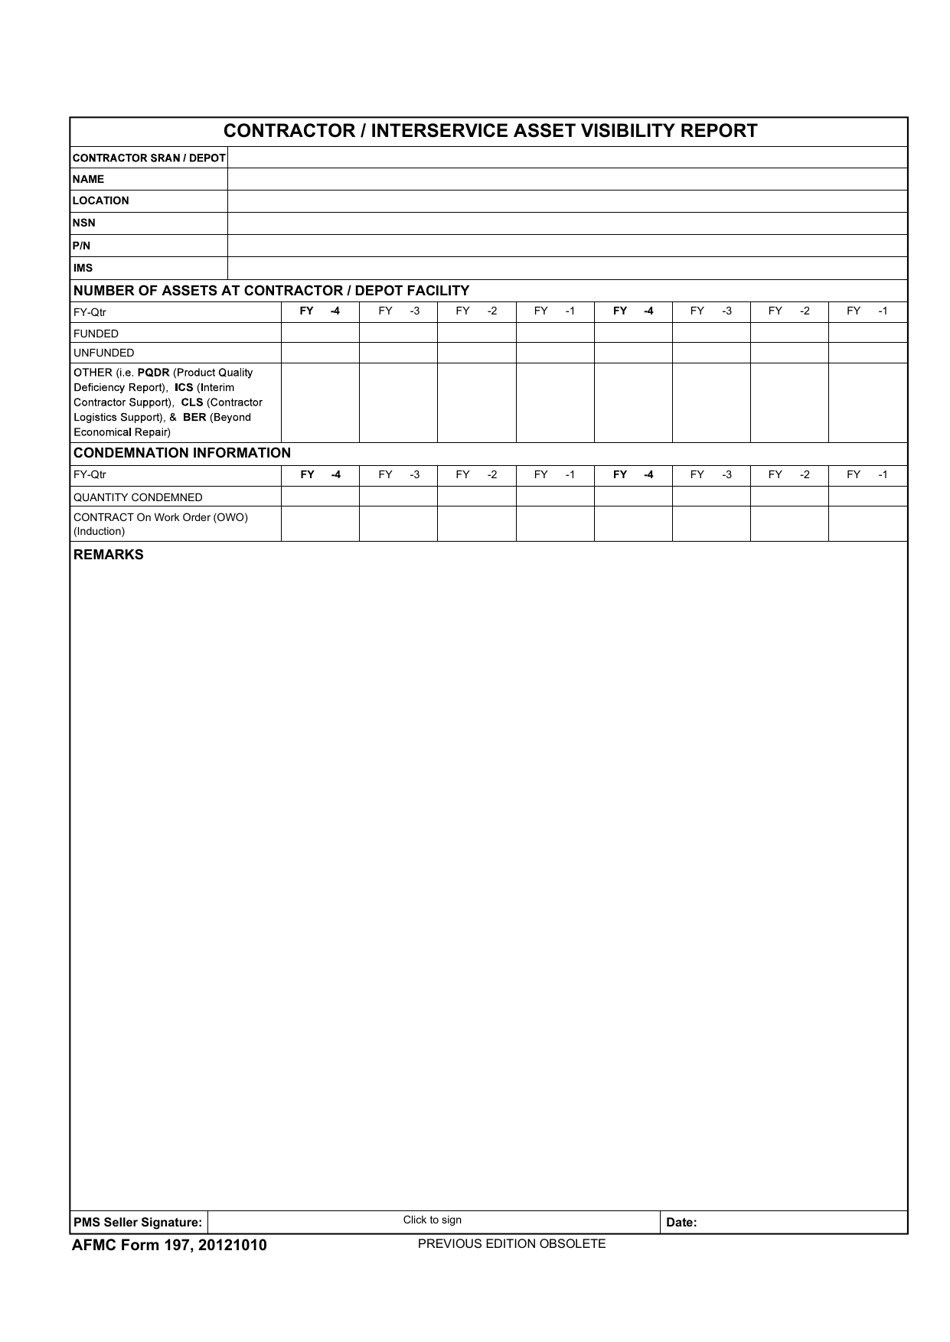 AFMC Form 197 Contractor / Interservice Asset Visibility Report, Page 1